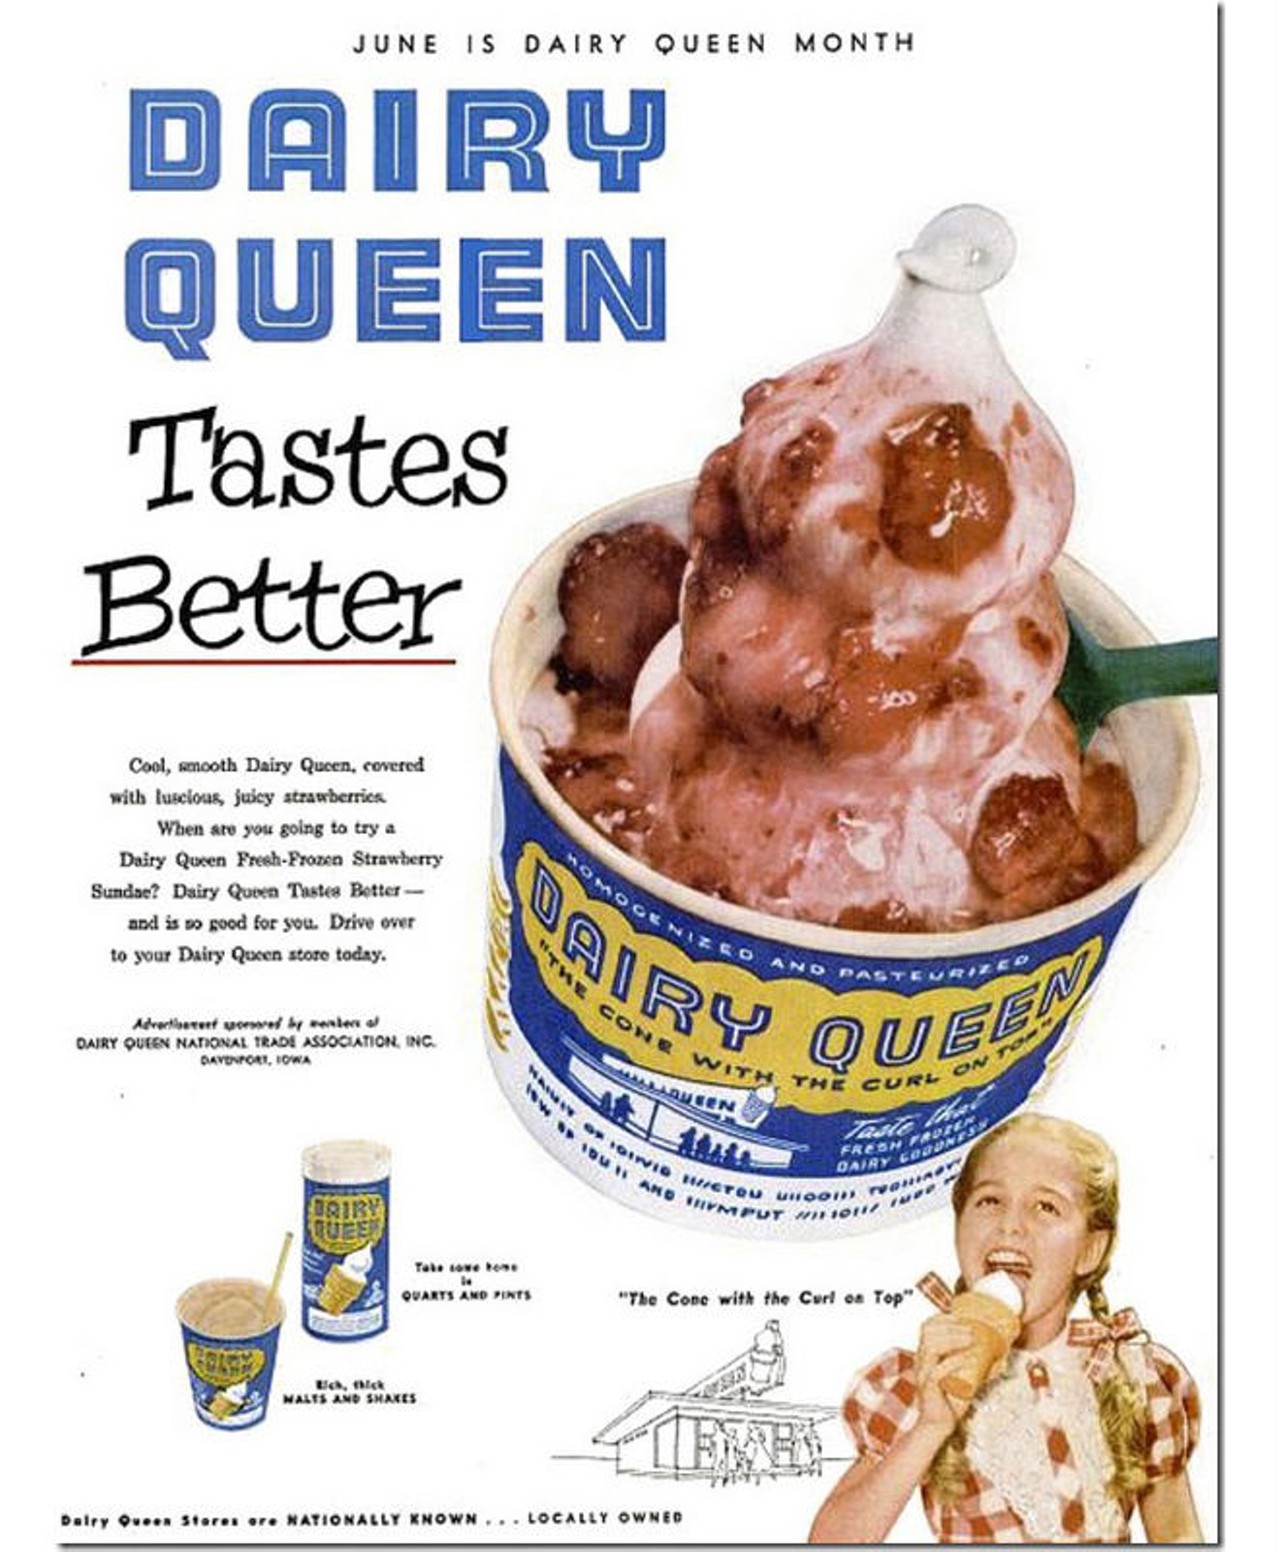 Could you imagine the pressure on a Dairy Queen server in the '50s to ensure that there was a perfect curl at the top of each ice cream they served?via Chronically Vintage